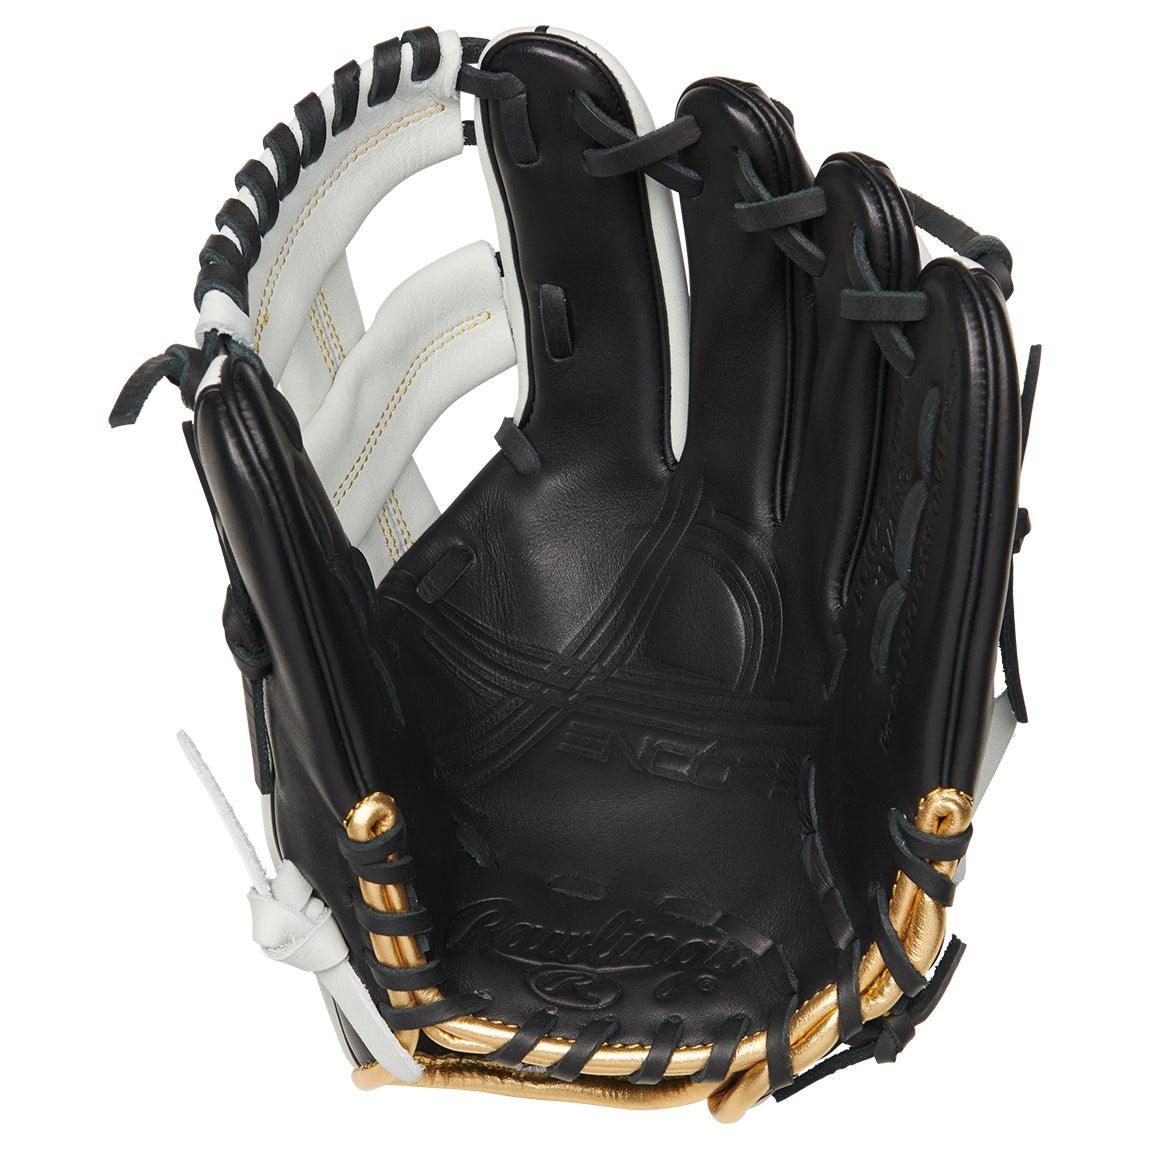 Encore 11.25-Inch Infield Glove - Sports Excellence